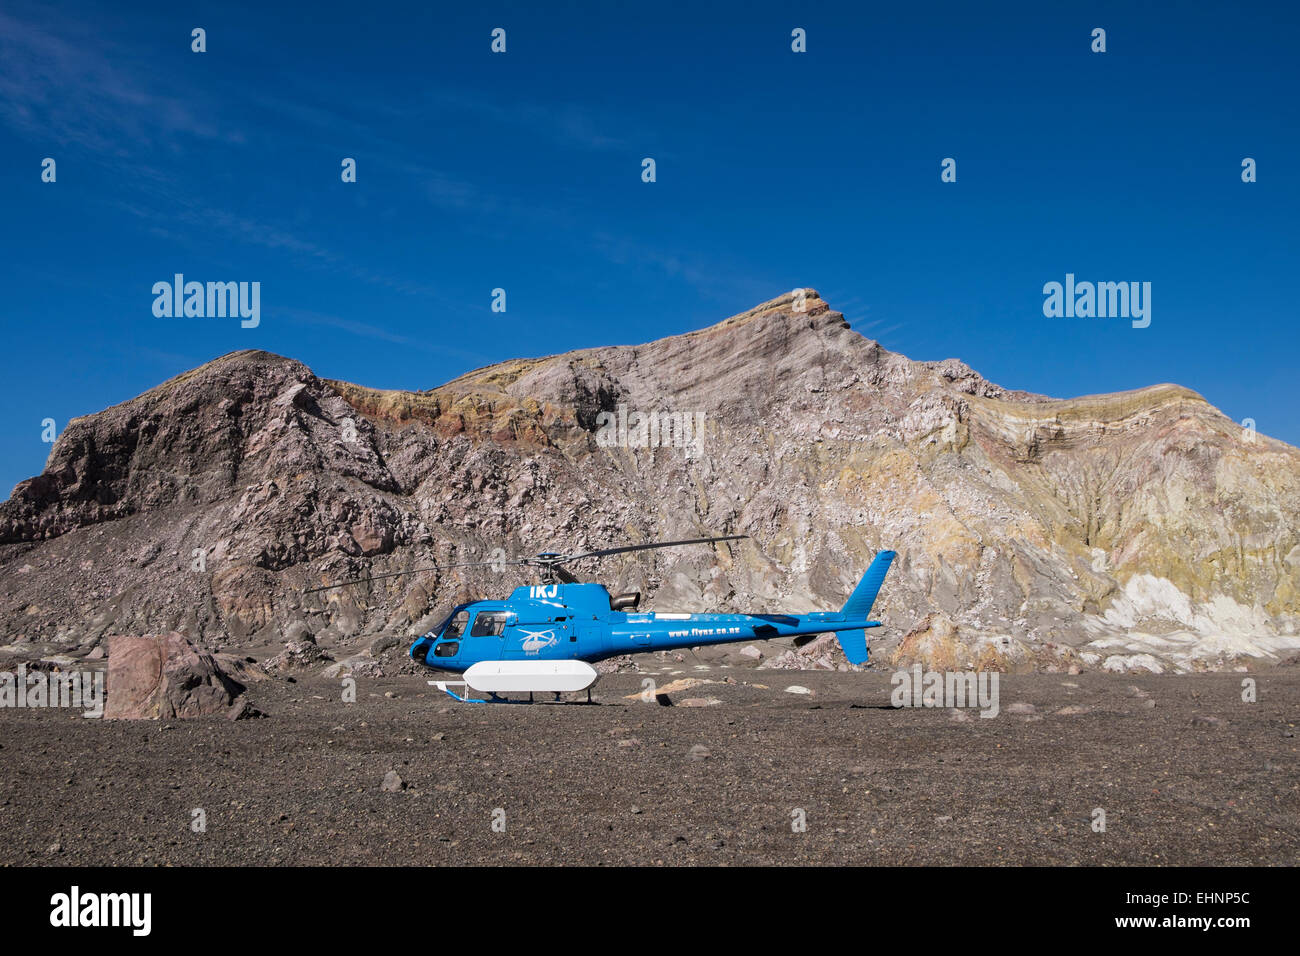 Helicopter on White Island volcano off the coast of New Zealand. Stock Photo